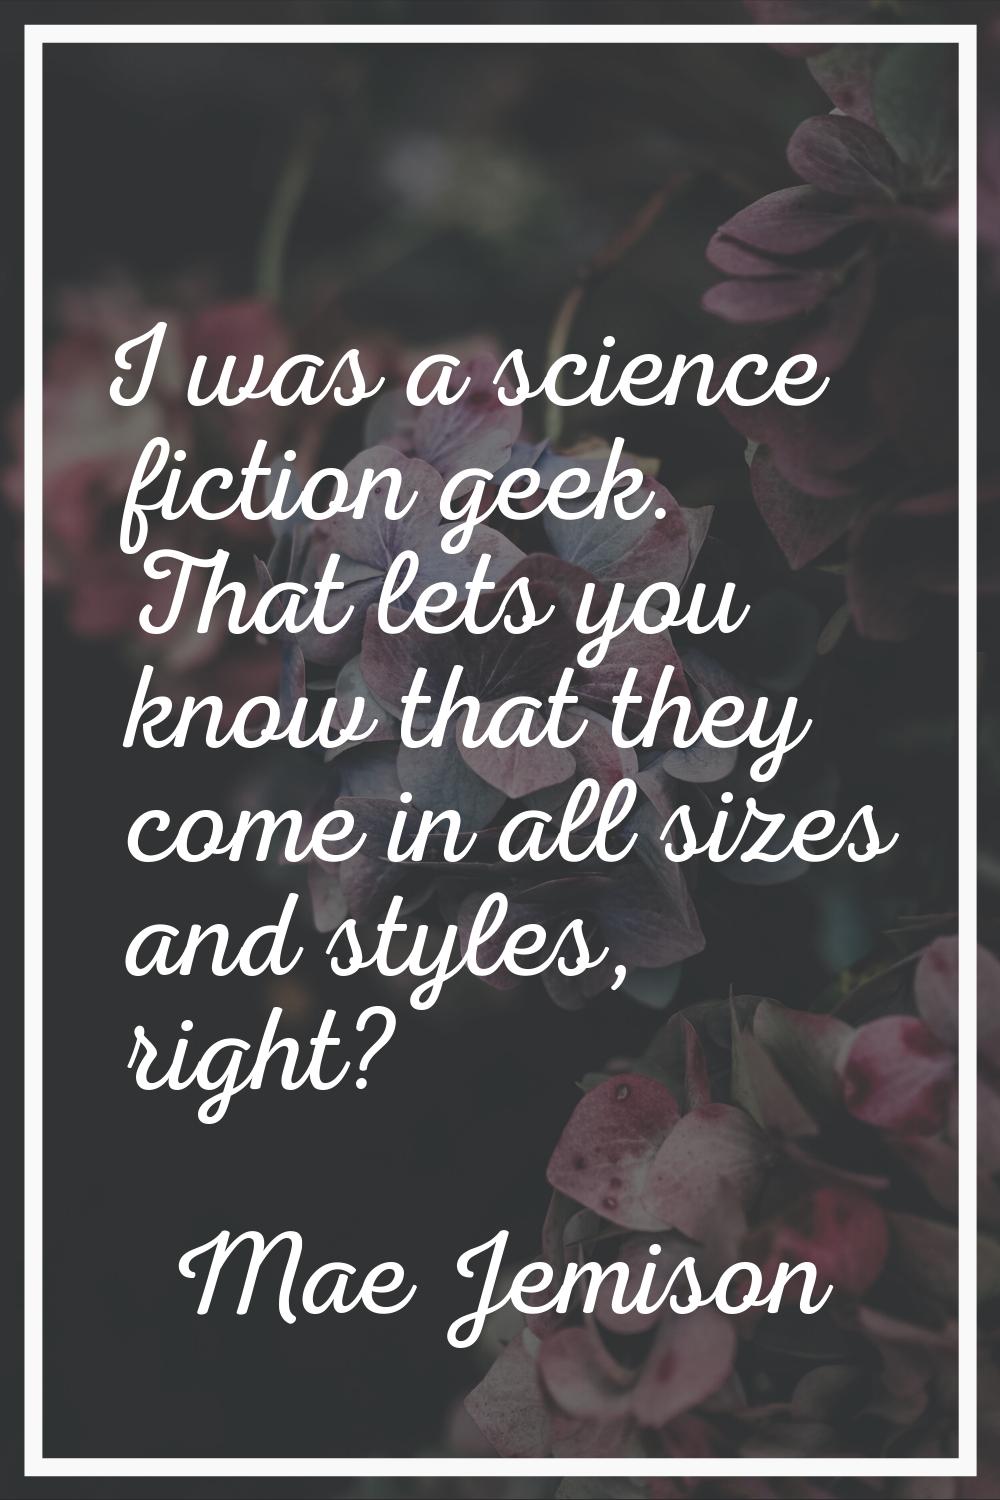 I was a science fiction geek. That lets you know that they come in all sizes and styles, right?